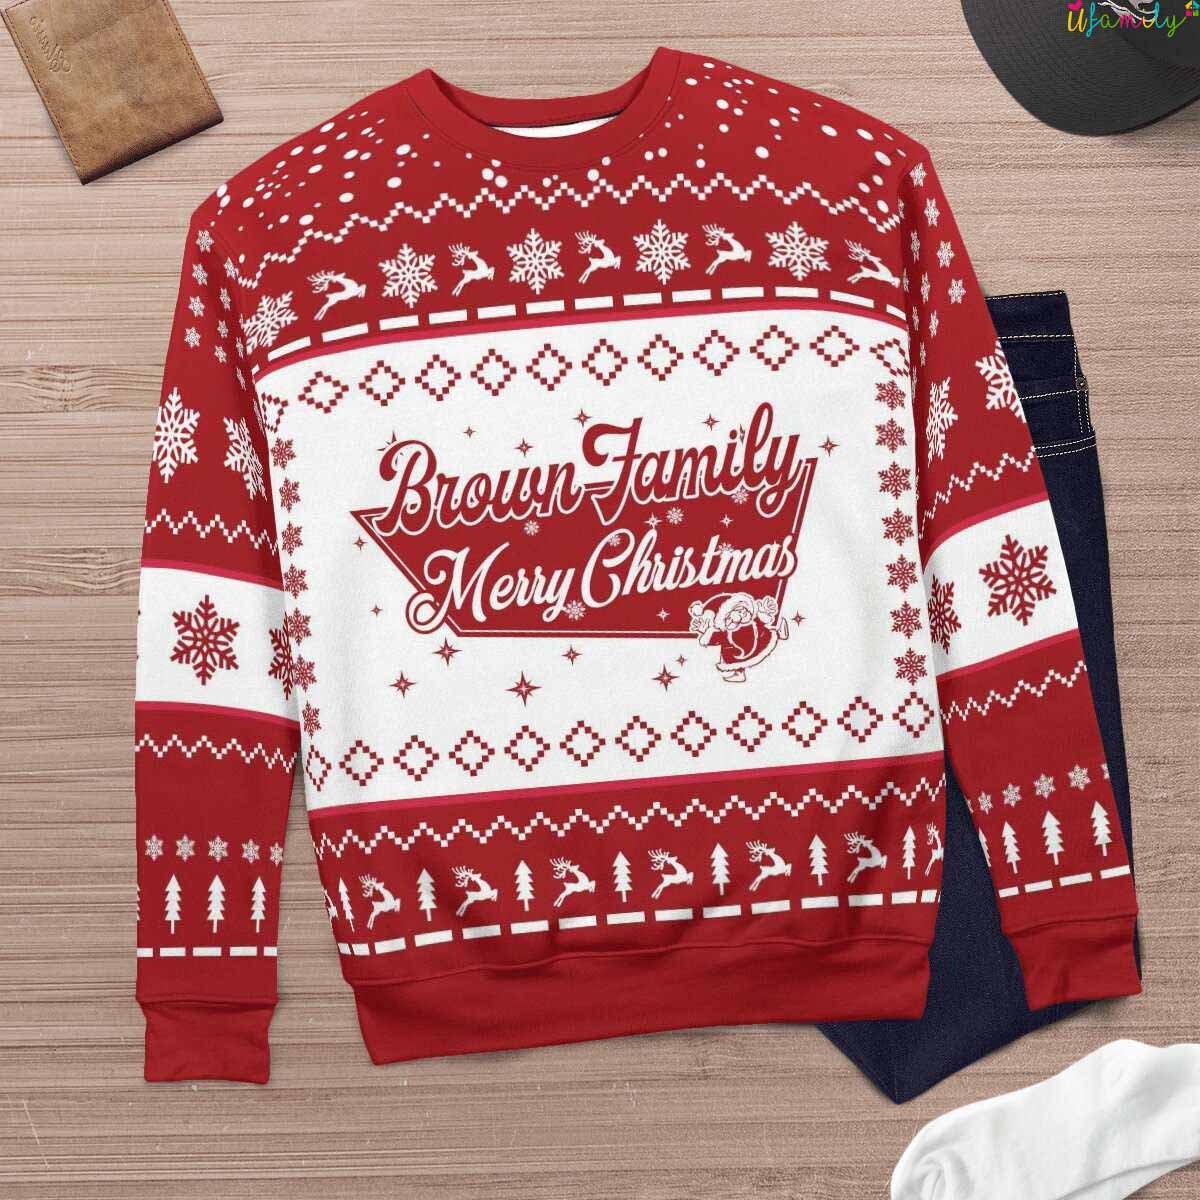 Brown Family Personalized Sweatshirts, Brown Family Gift